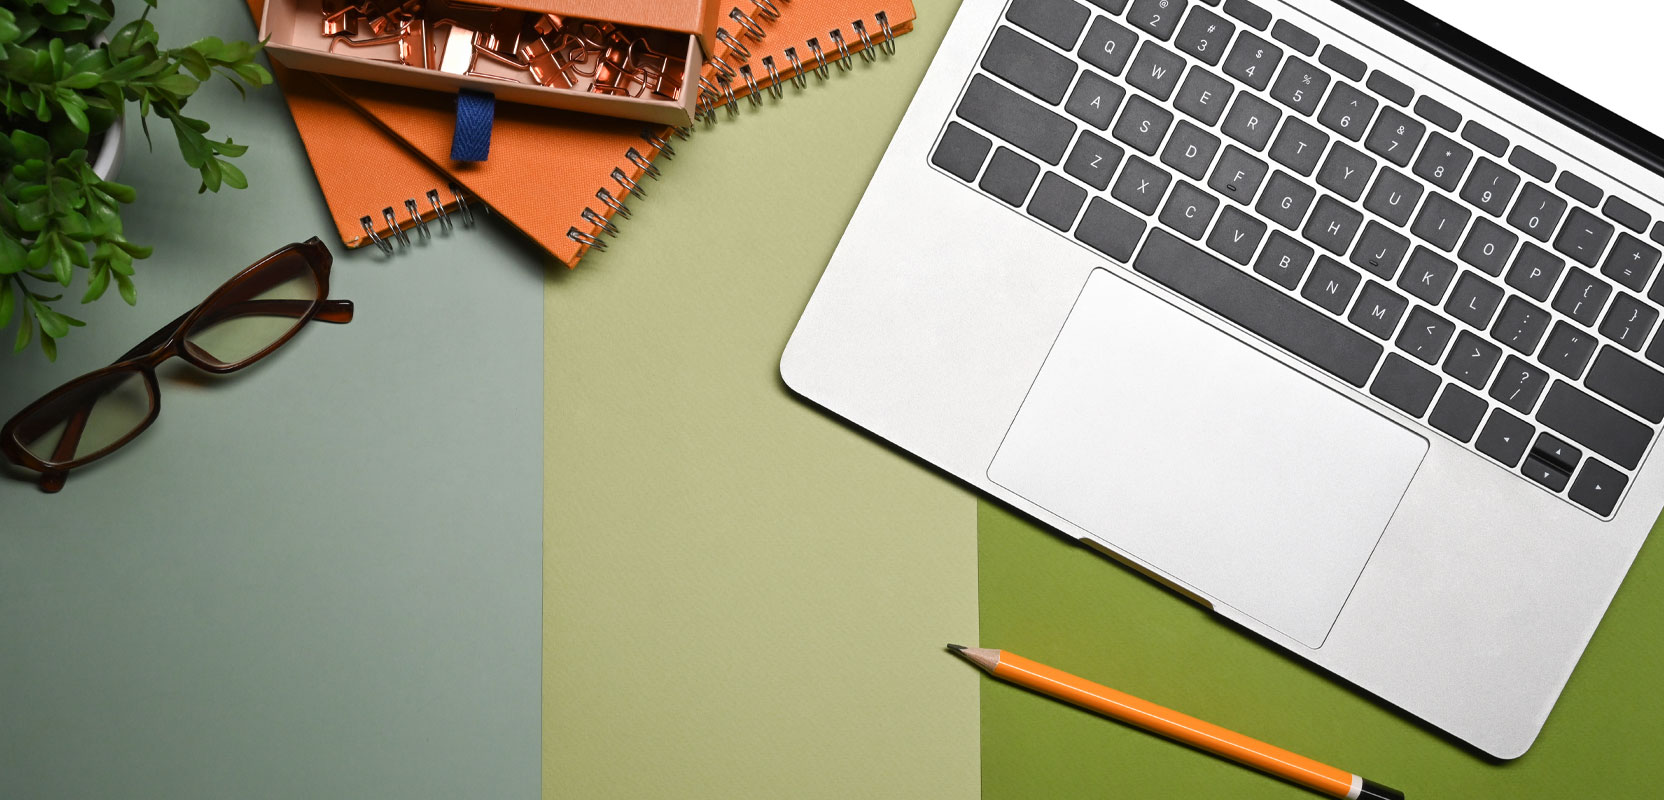 Top view of a laptop, a pencil, and several spiral-bound notebooks on a striped green surface